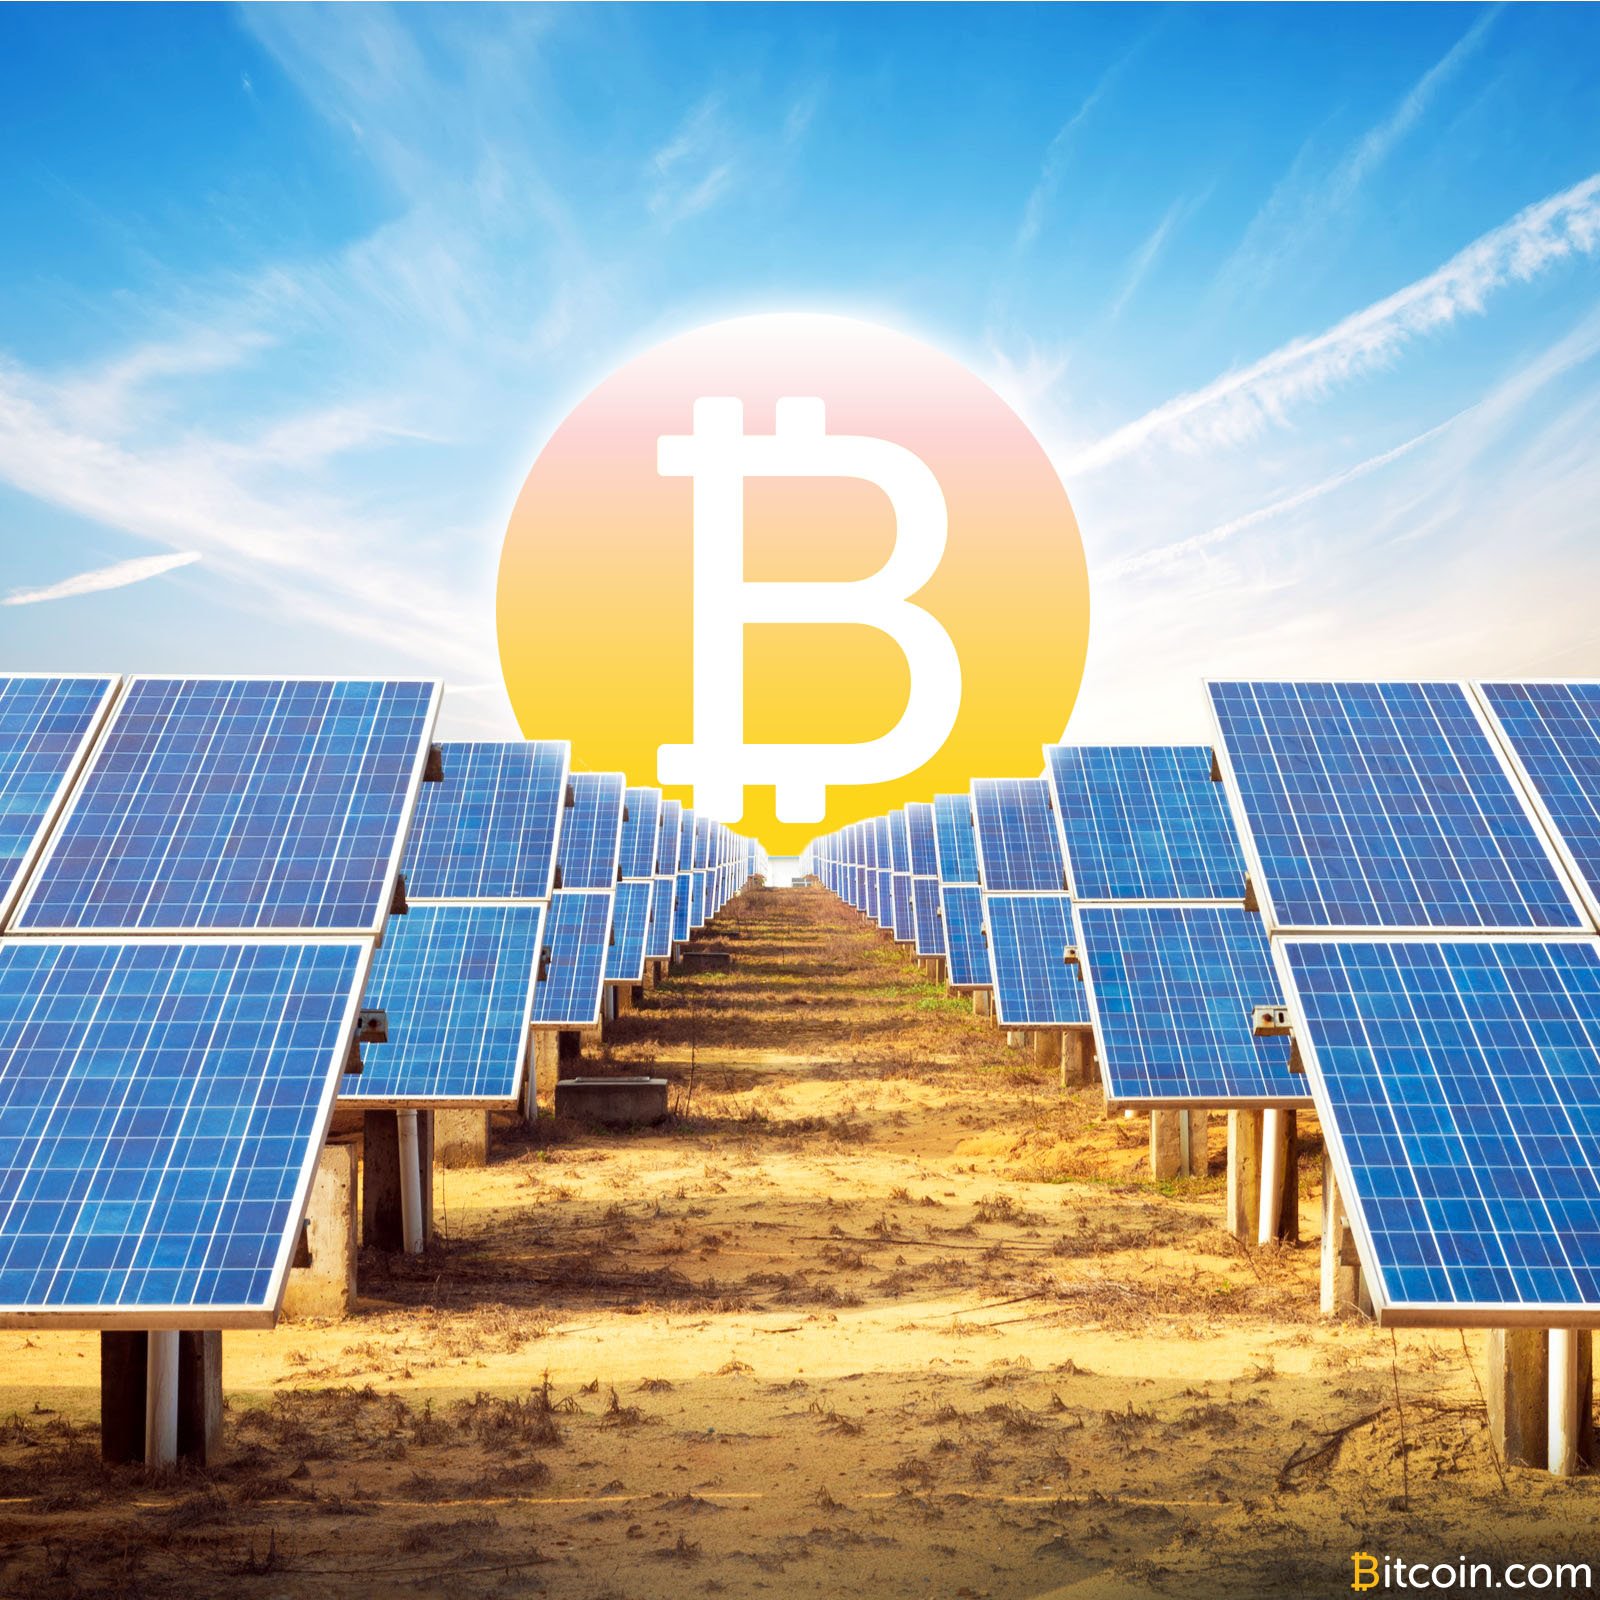 Sunex Lets Members Purchase Solar Cells and Distributes Profits as Bitcoin or Fiat